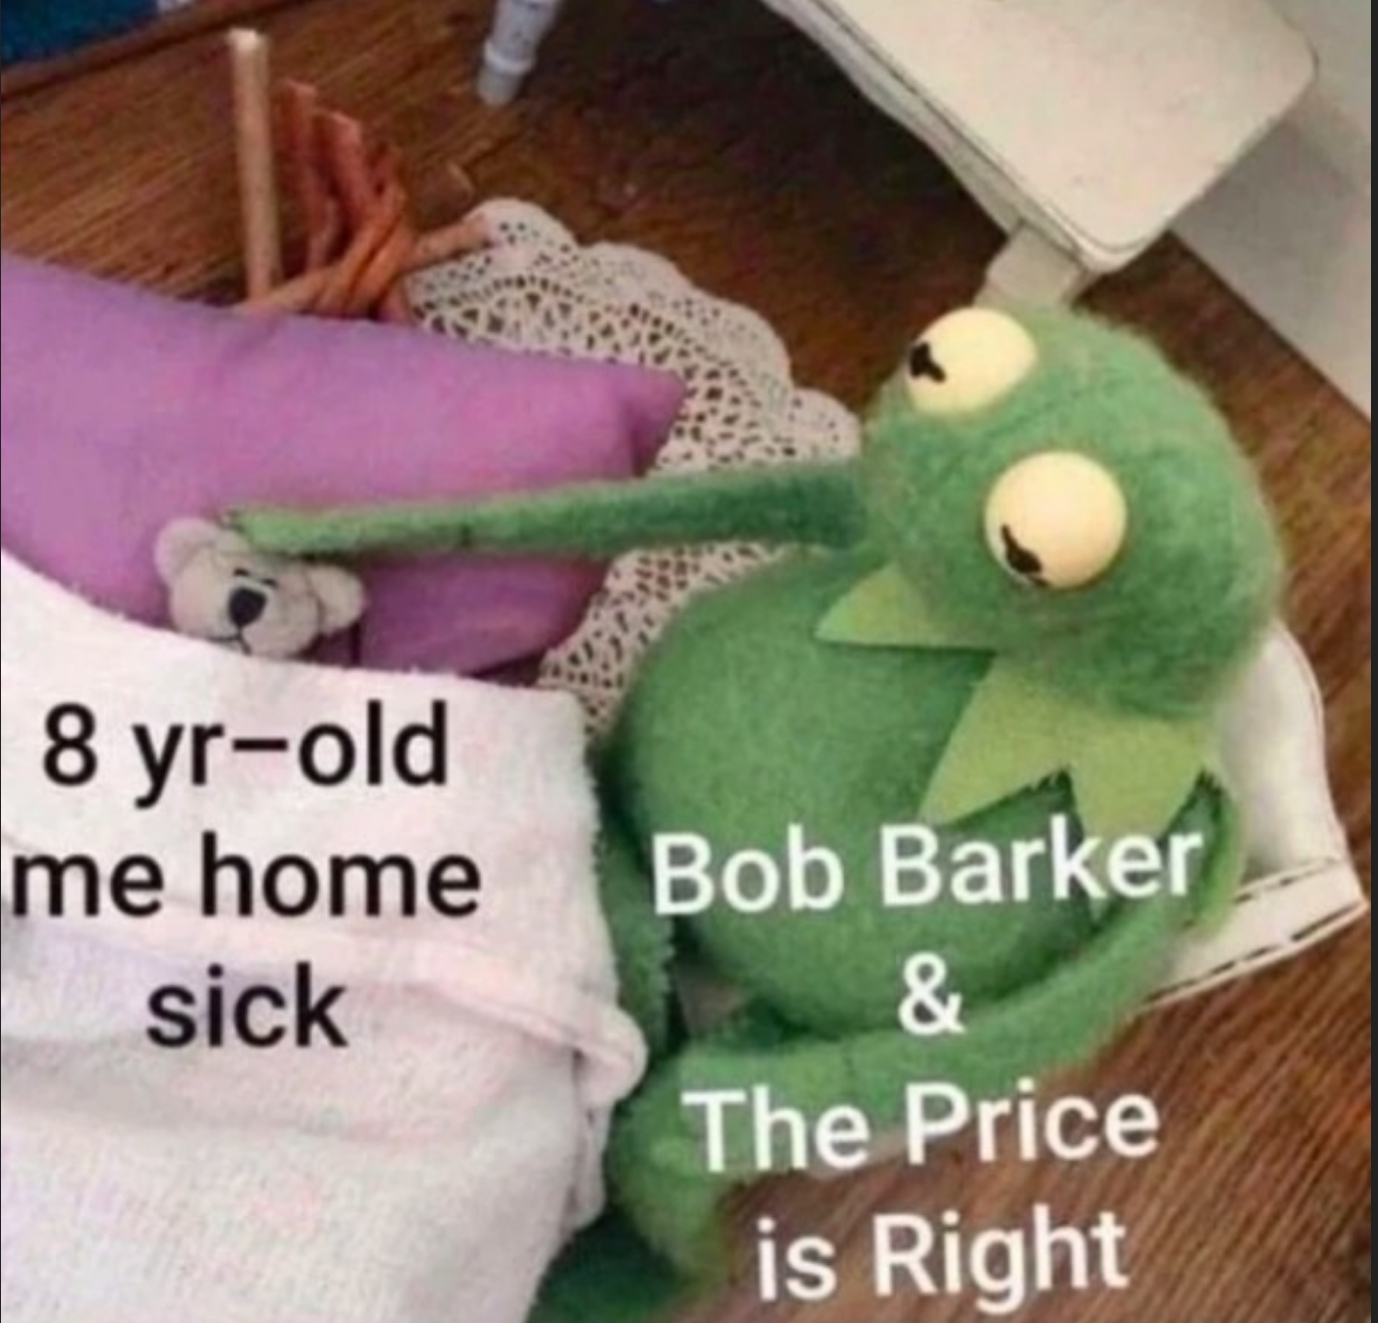 price is right home sick meme - 8 yrold me home Bob Barker sick The Price is Right